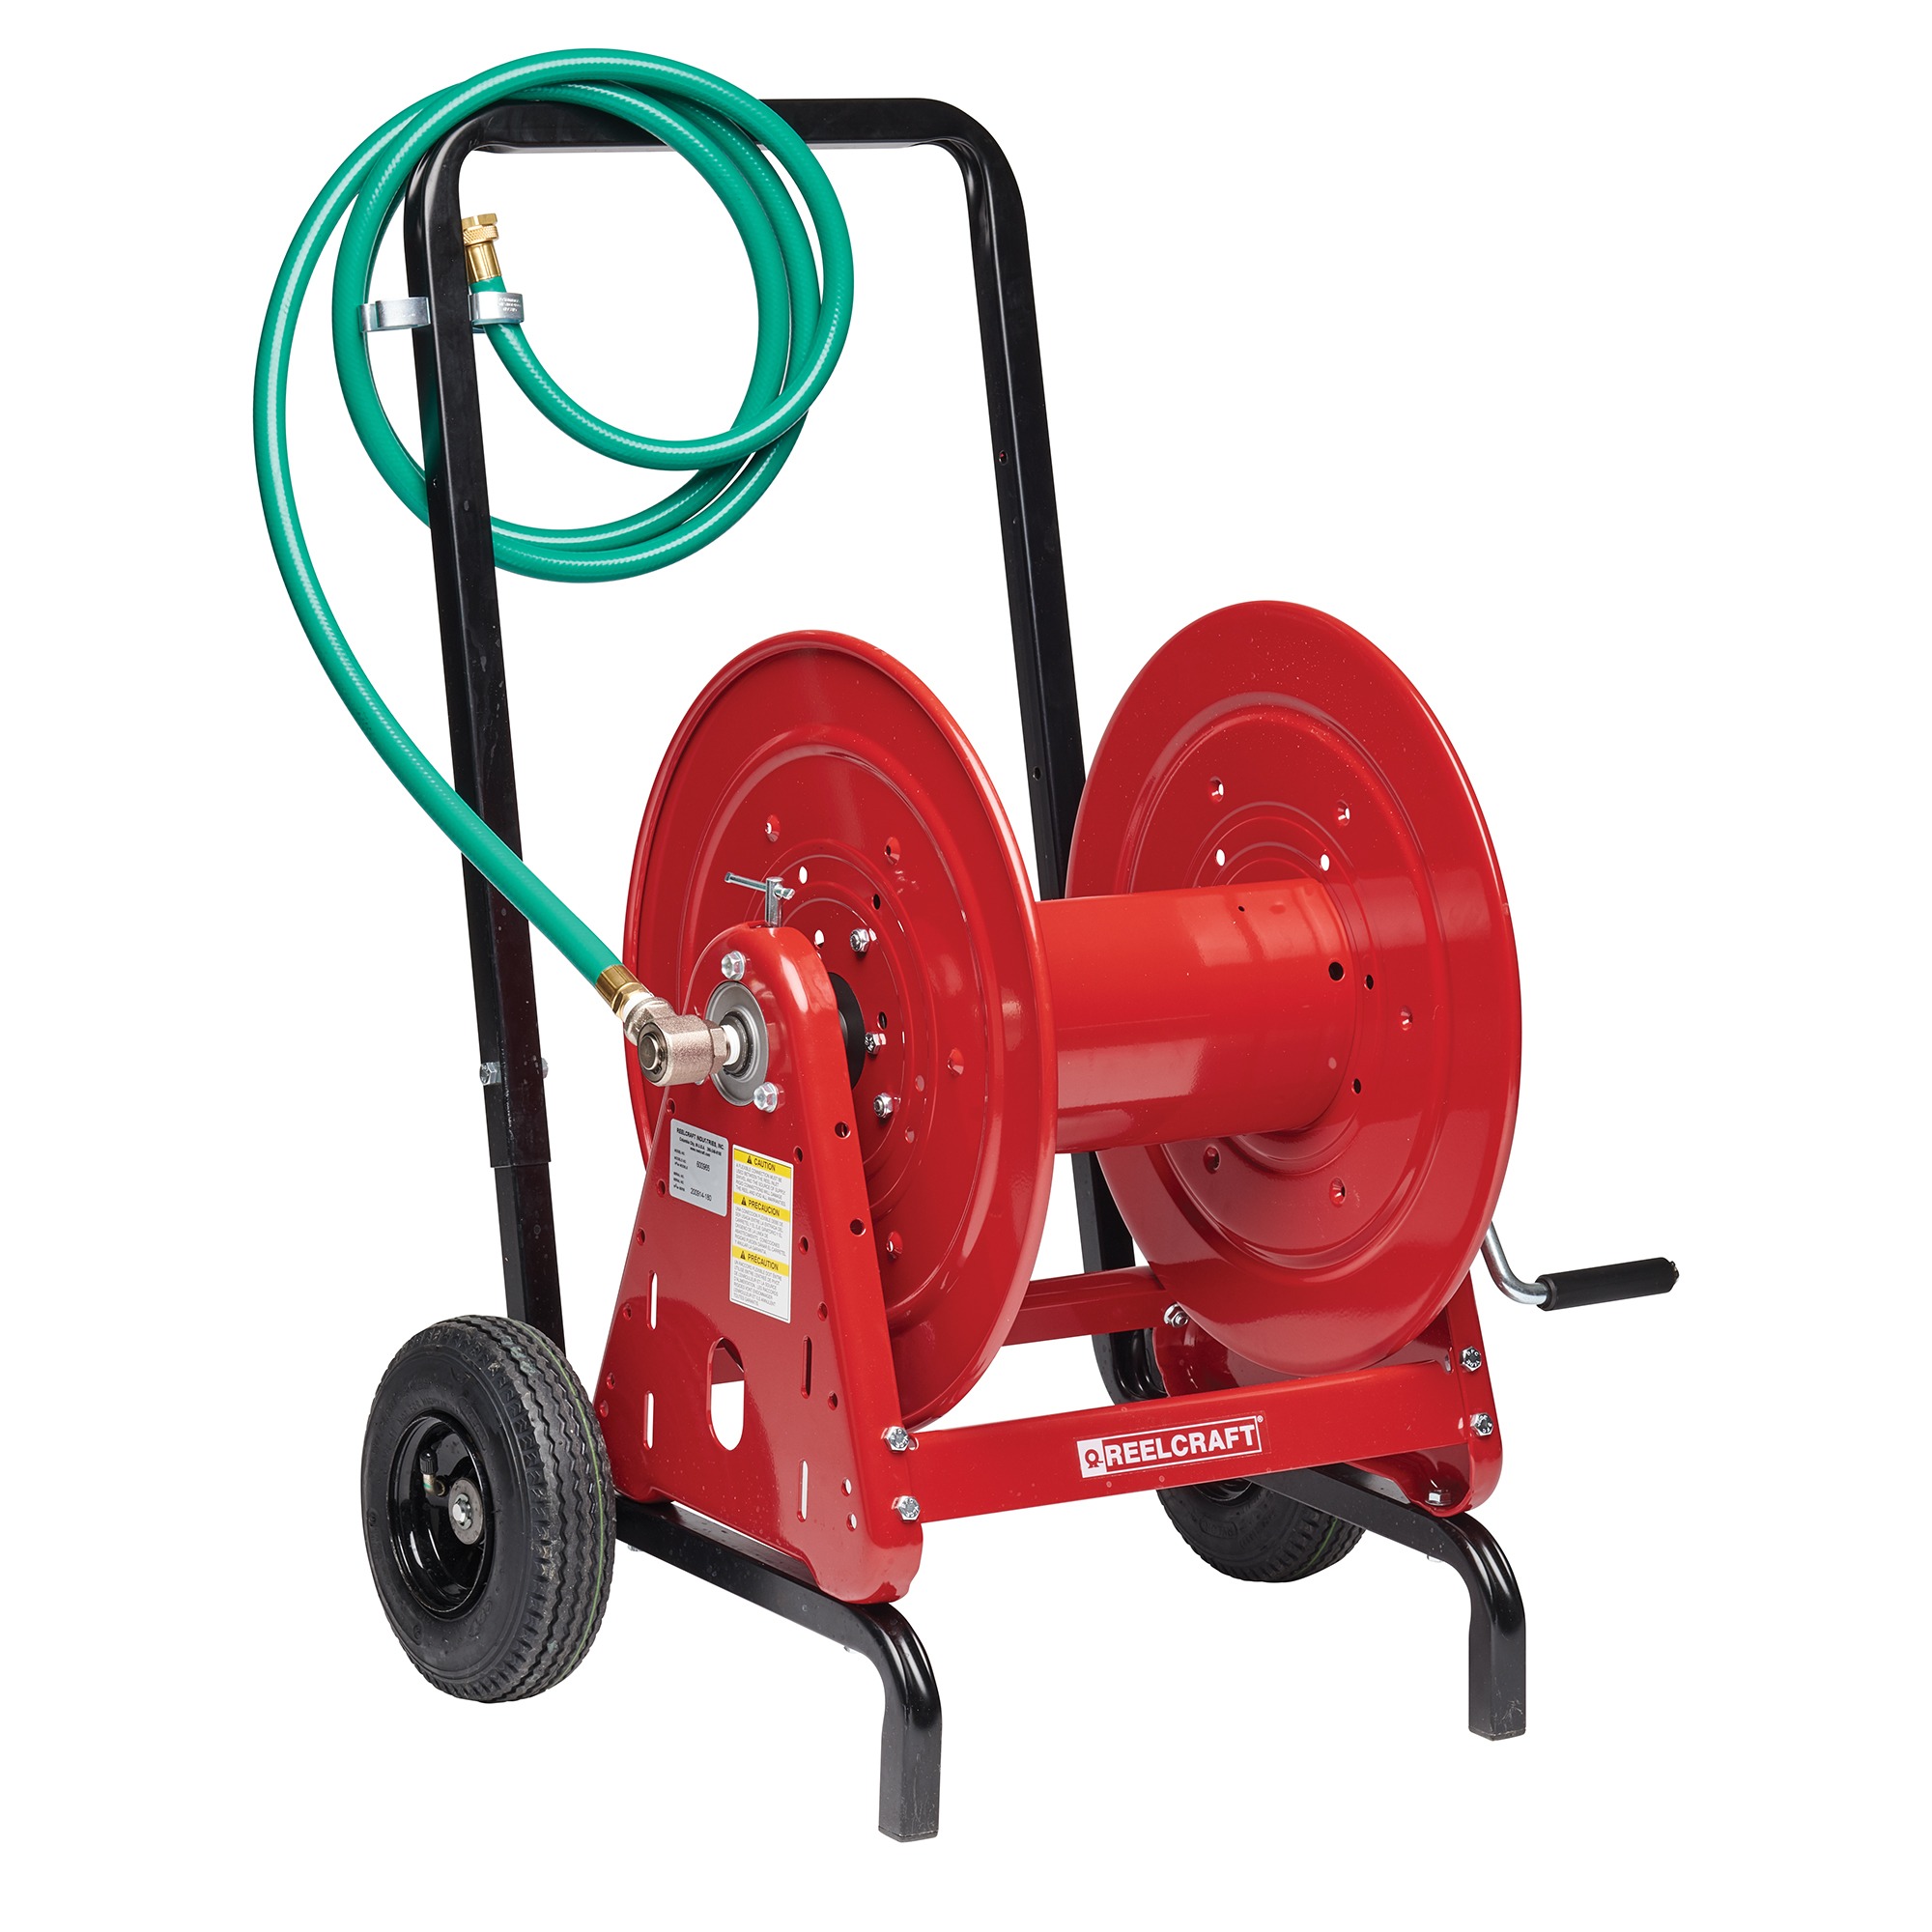 Reelcraft 600968 Hose Reel with Cart